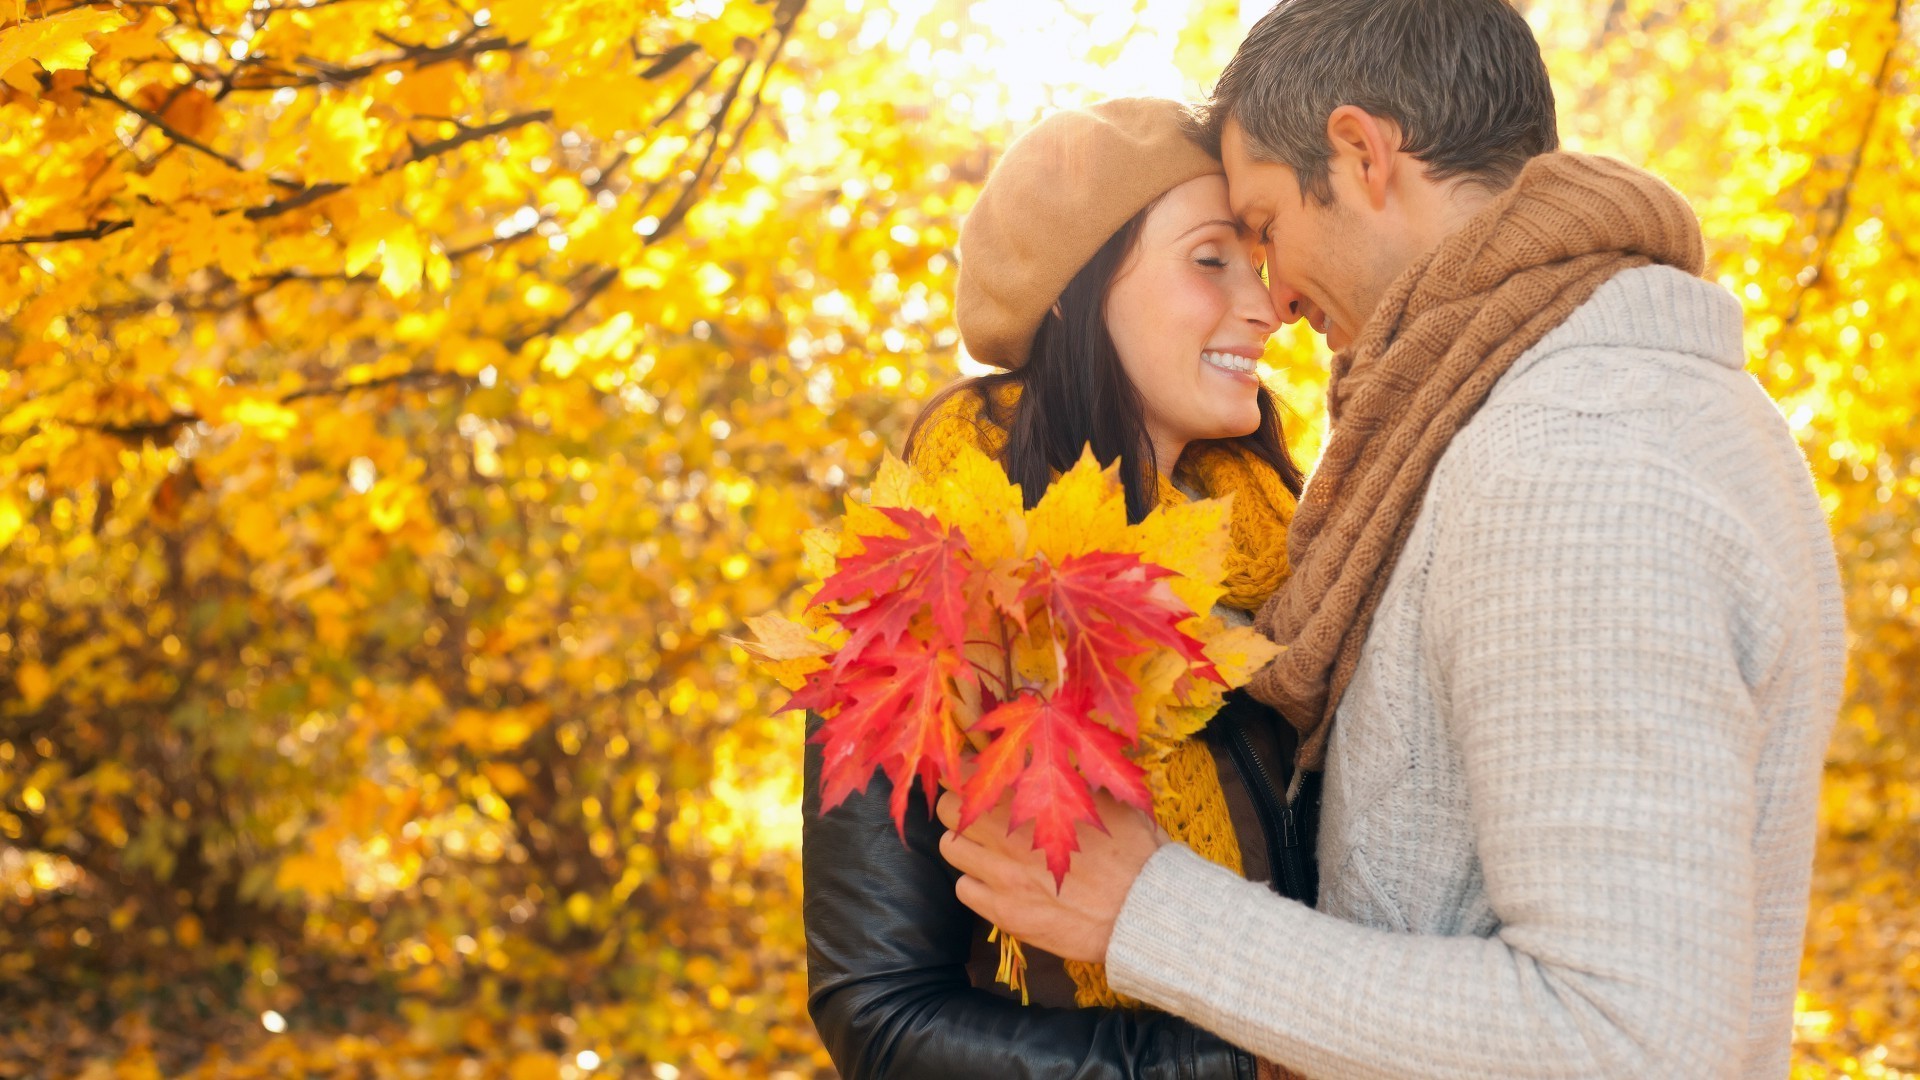 couples fall outdoors maple park nature love woman happiness leaf girl beautiful two adult leisure fun family man romance smile